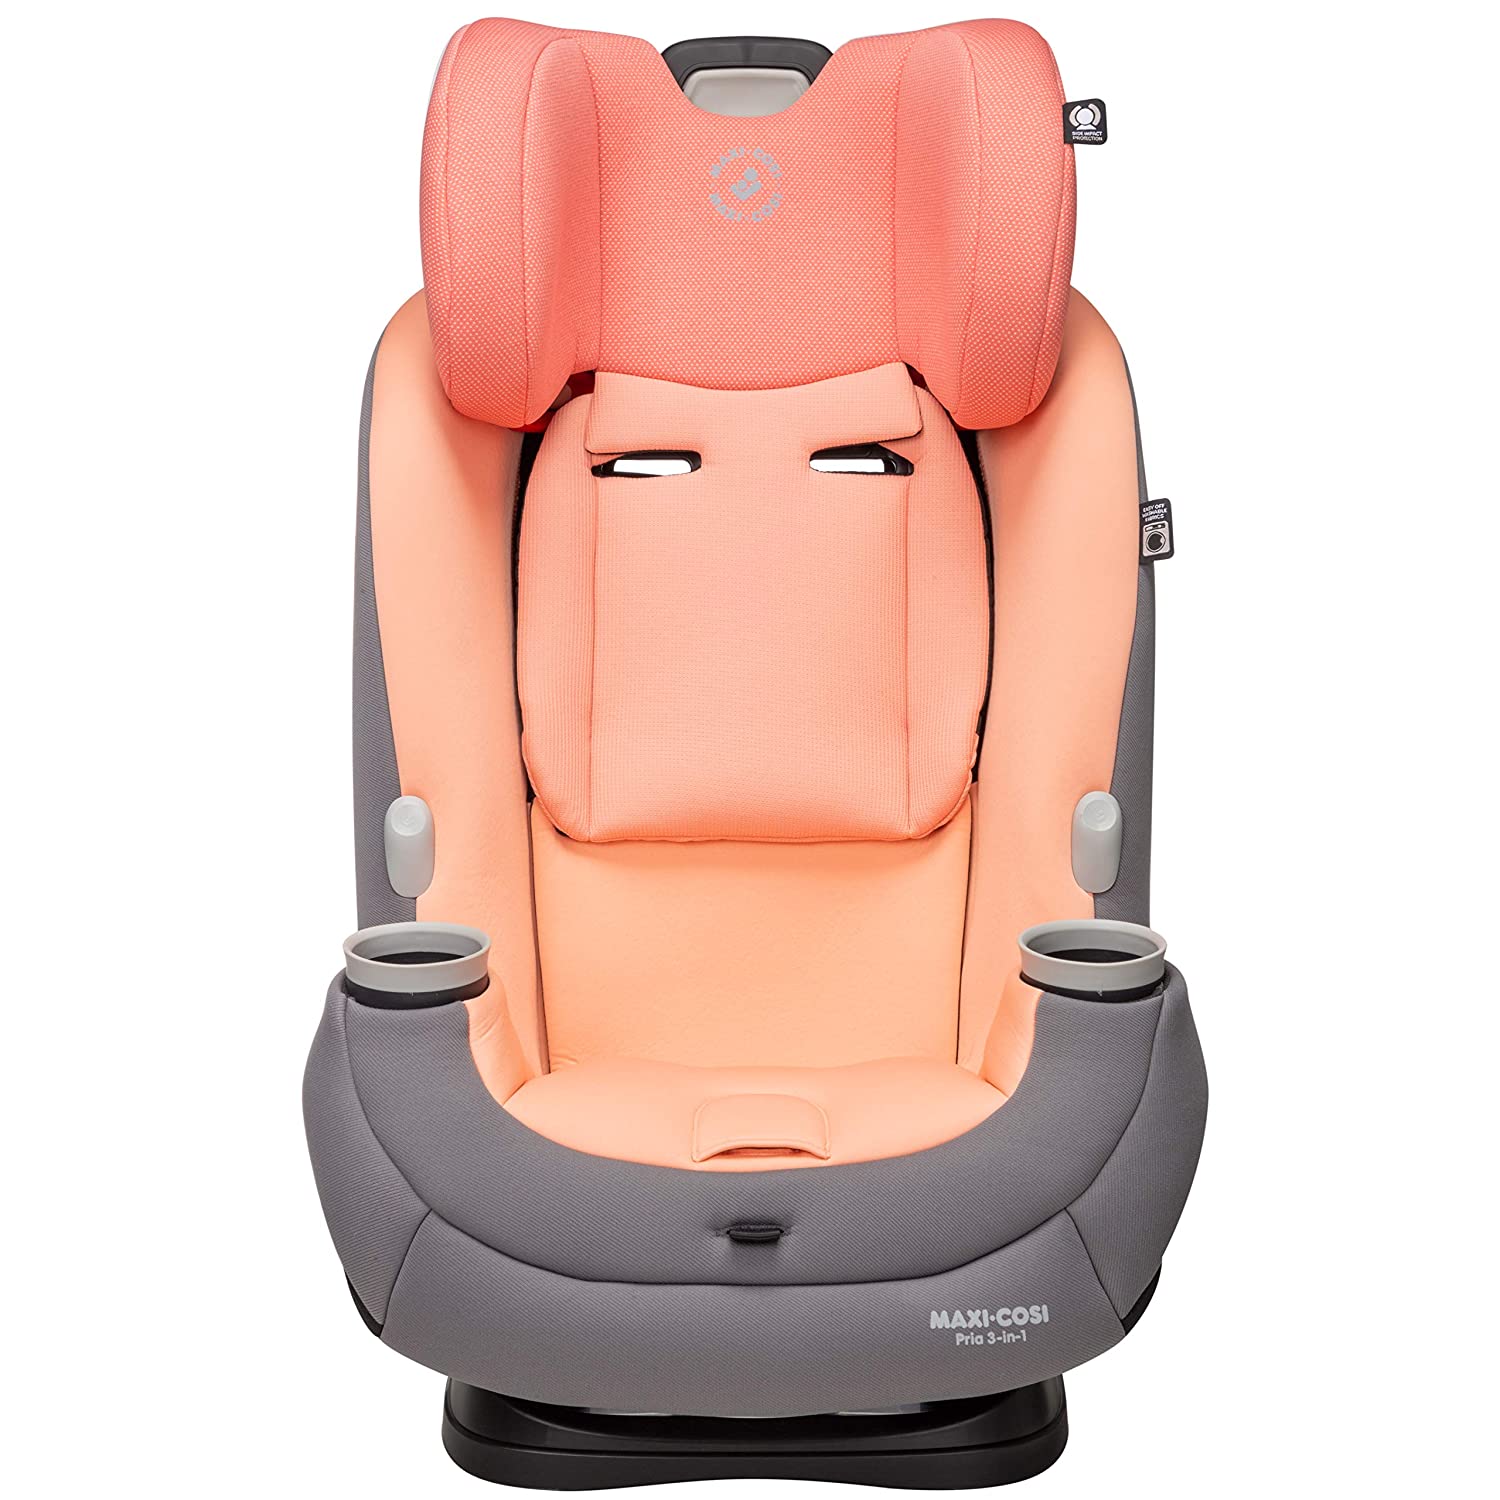 Pria™ 3-in-1 Seat - Little NYC